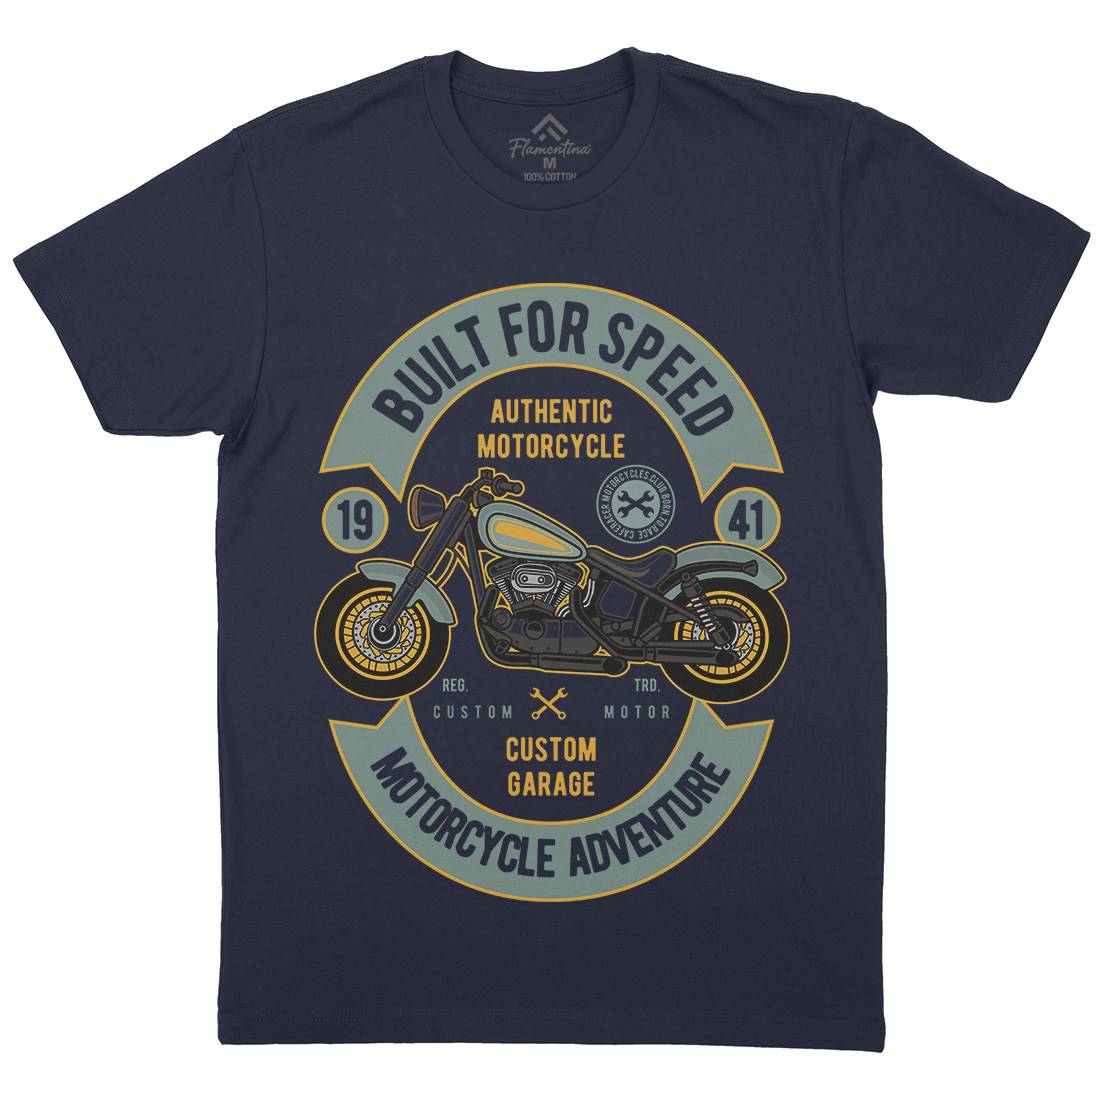 Built For Speed Mens Crew Neck T-Shirt Motorcycles D512